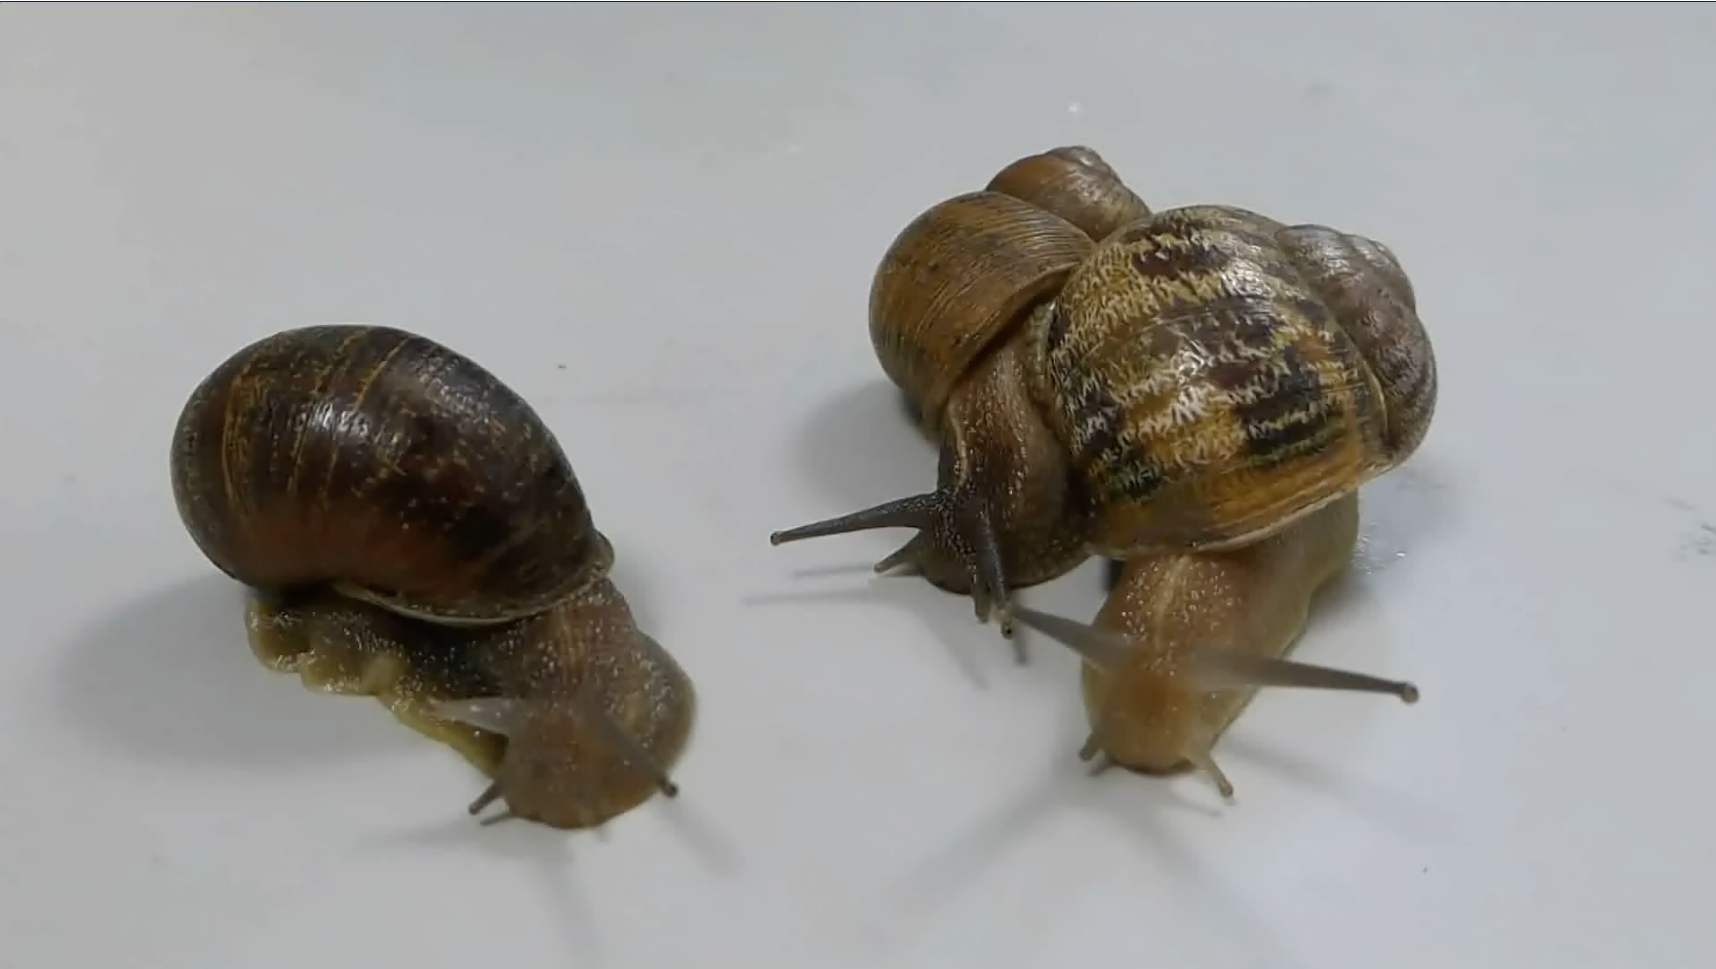 Jeremy the snail turns away as two snails, sent to him as potential mates, decide to mate with each other instead. (Photo courtesy Angus Davison)